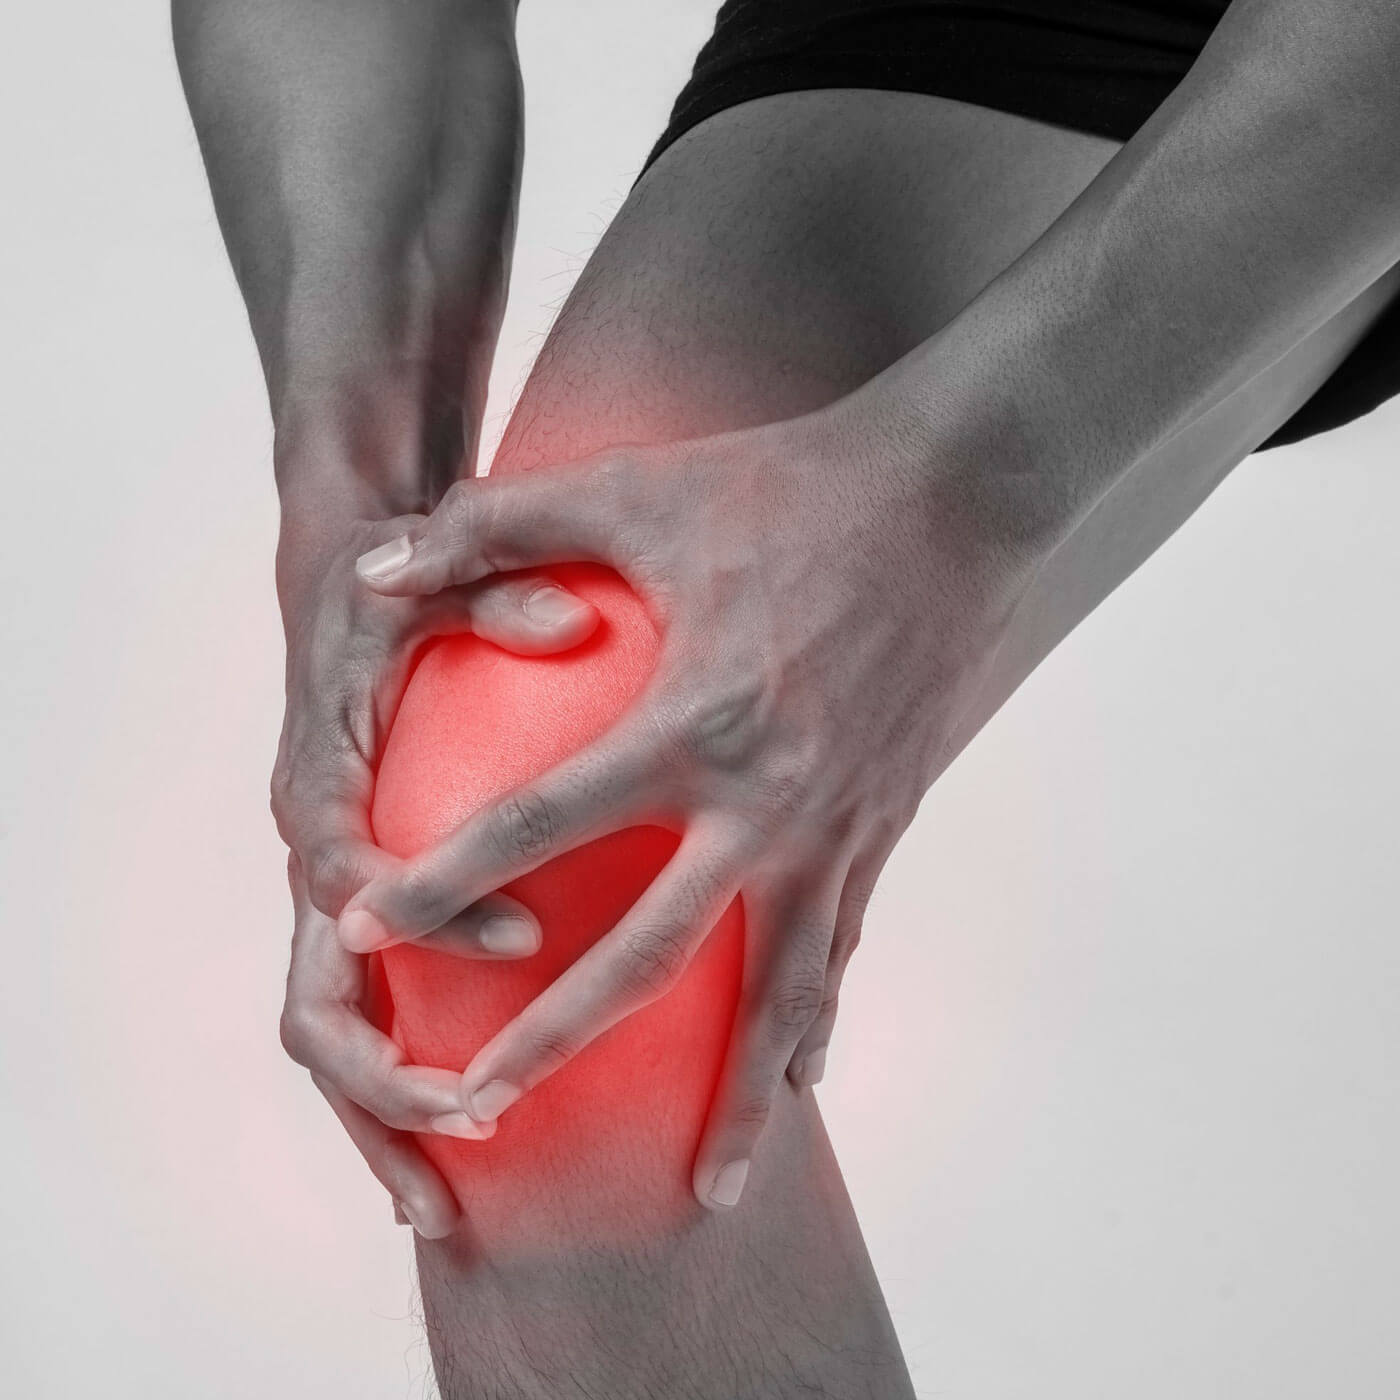 Essential Chiropractic and Healthcare Clinic - Chiropractic Services Knee Joint Pain and Discomfort Relief Treatment